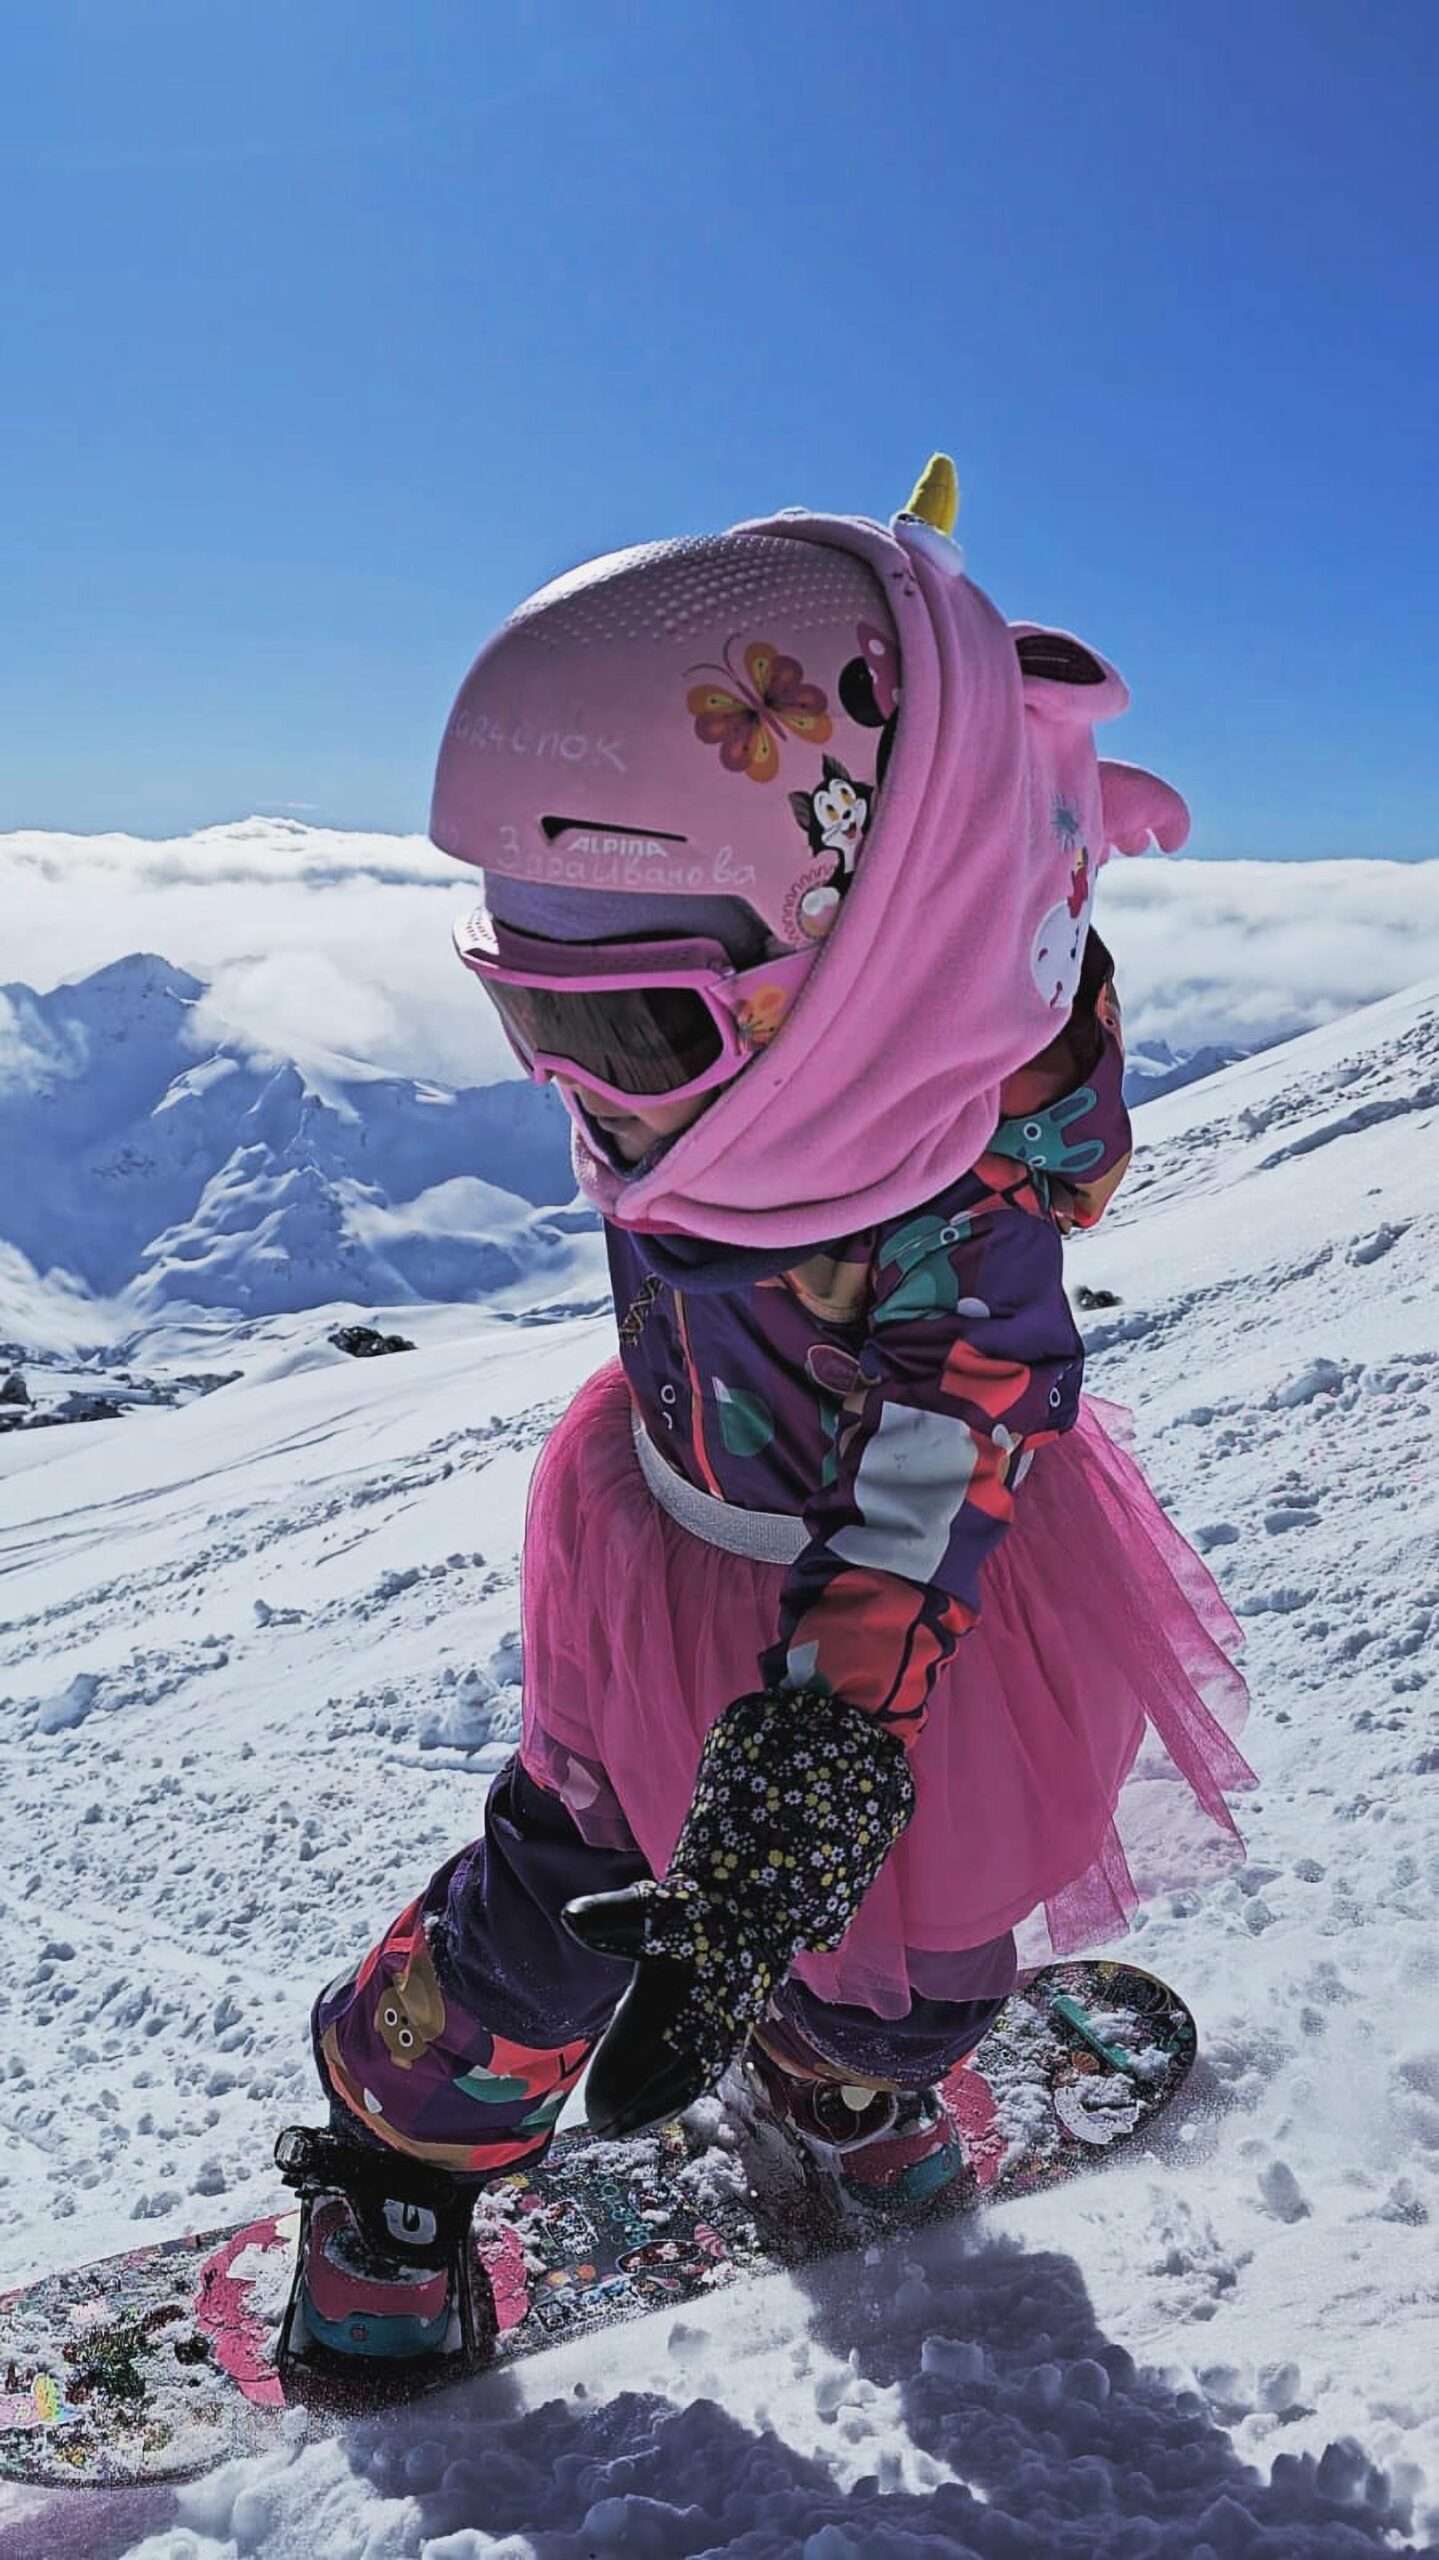 Read more about the article Meet The Four-Year-Old Girl Snowboarder Who Is Conquering Europe’s Highest Peaks